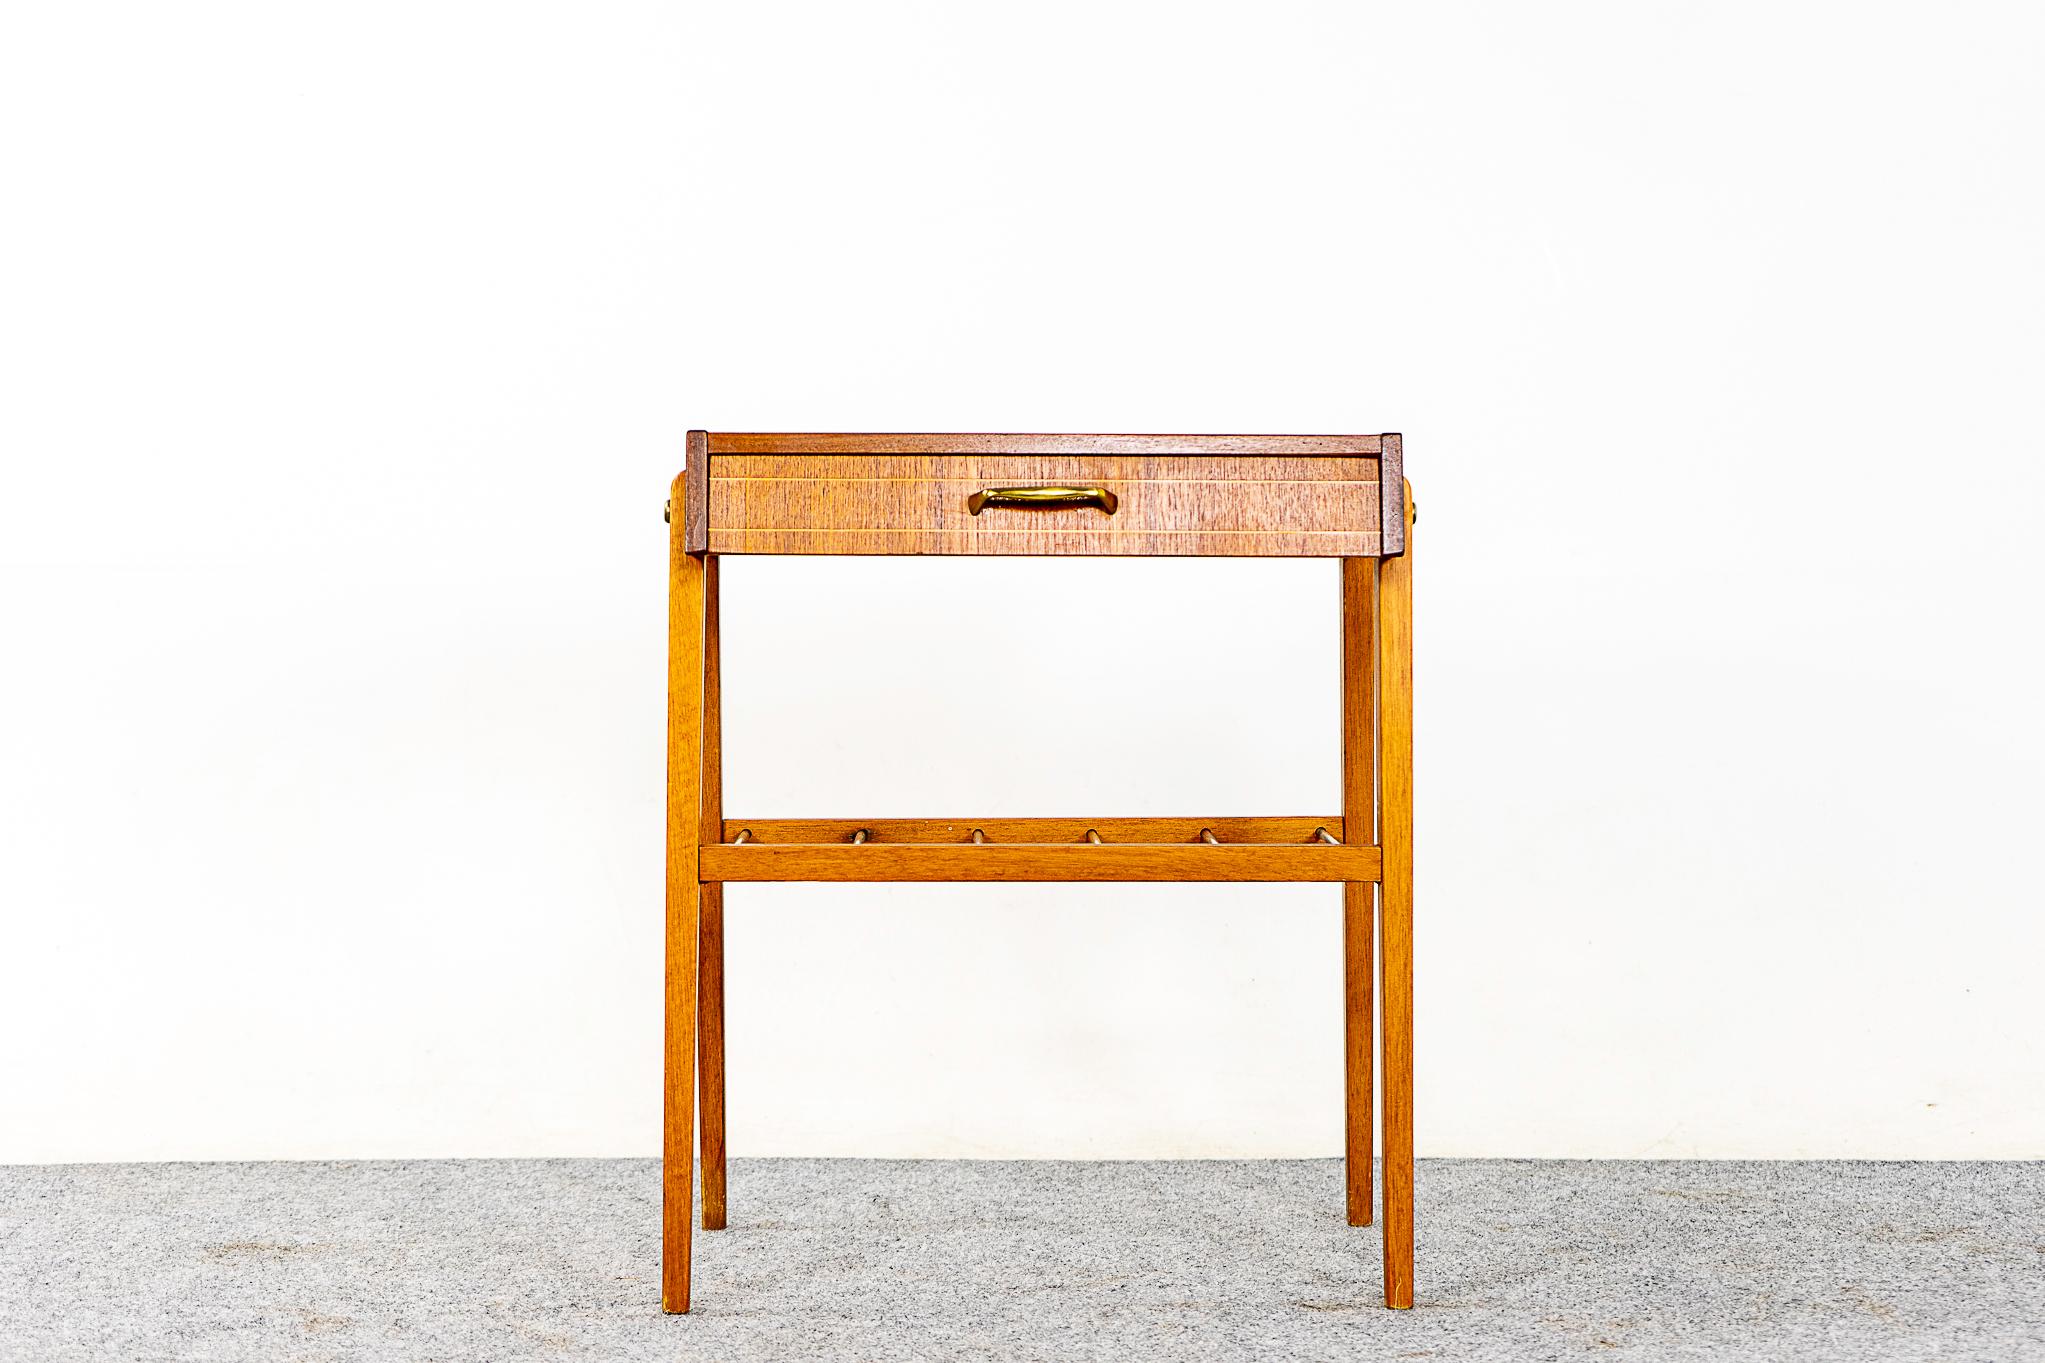 Teak Danish modern bedside table, circa 1960s. Beautifully veneered case rests on slender, tapered legs. Drawer offer storage for small items while metal shelf is perfect for your favorite book.

Unrestored item, good original condition, some marks